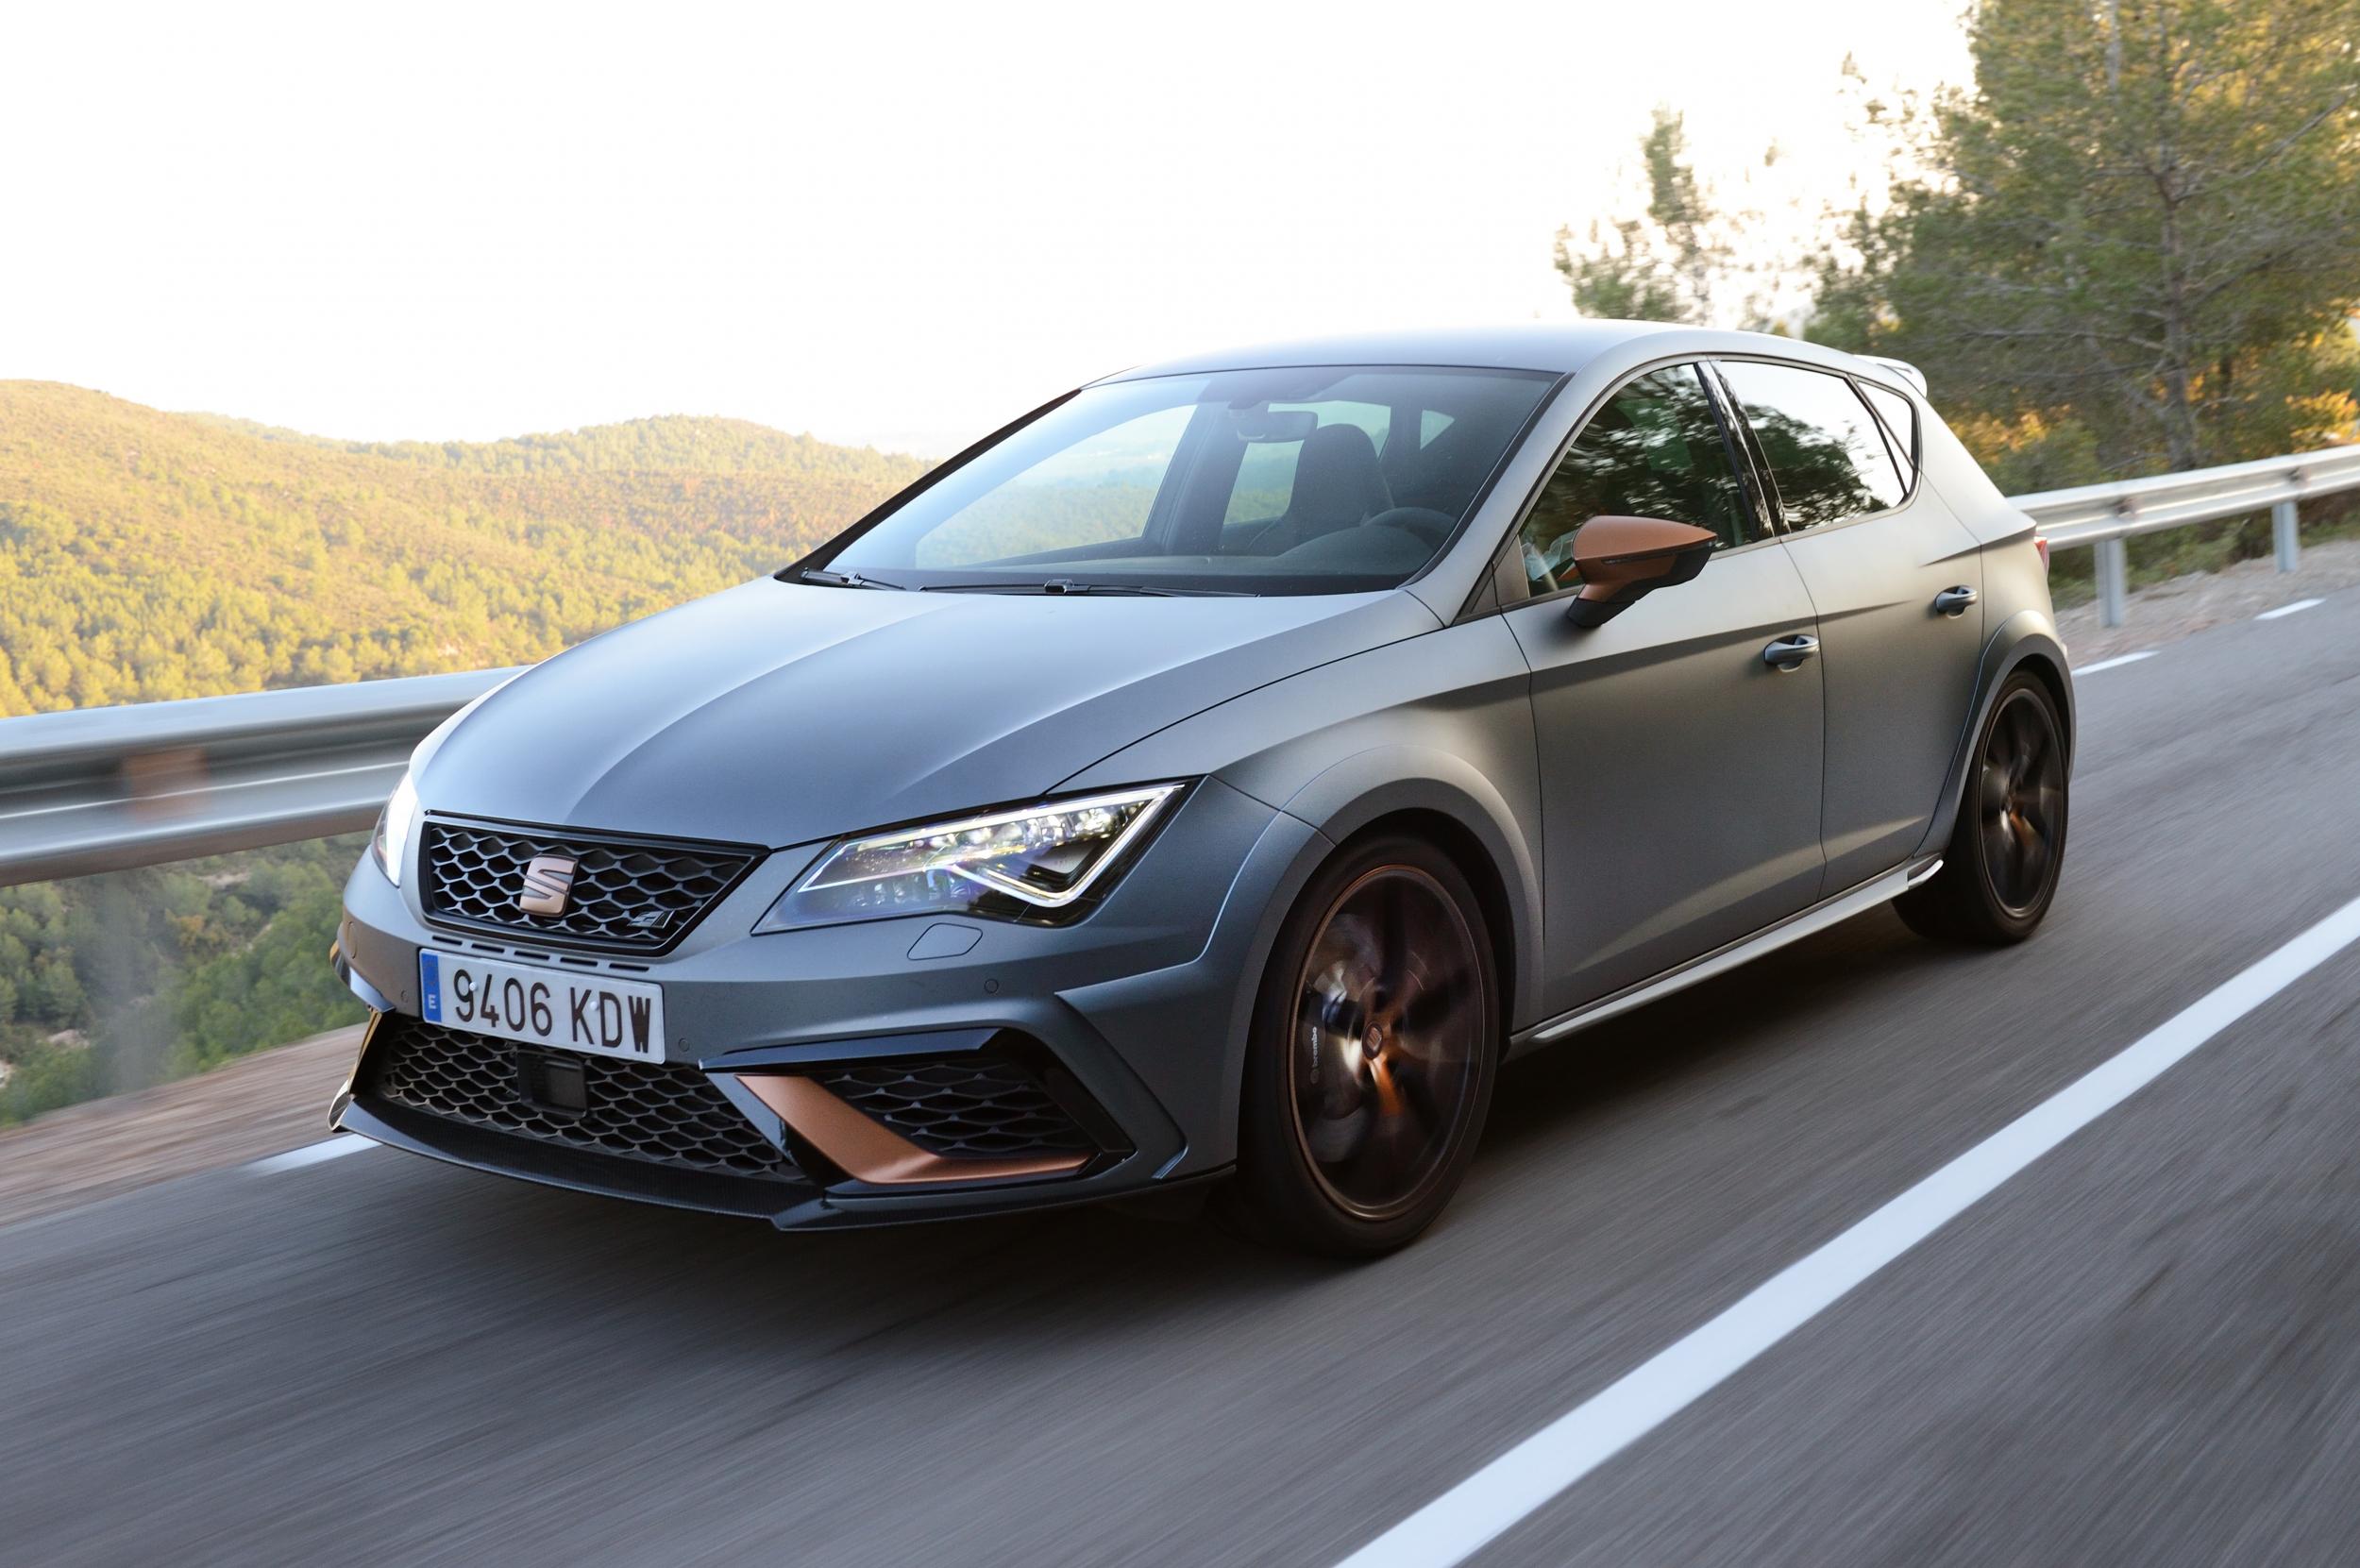 Seat Leon Cupra R review: One very fast and fun car to drive